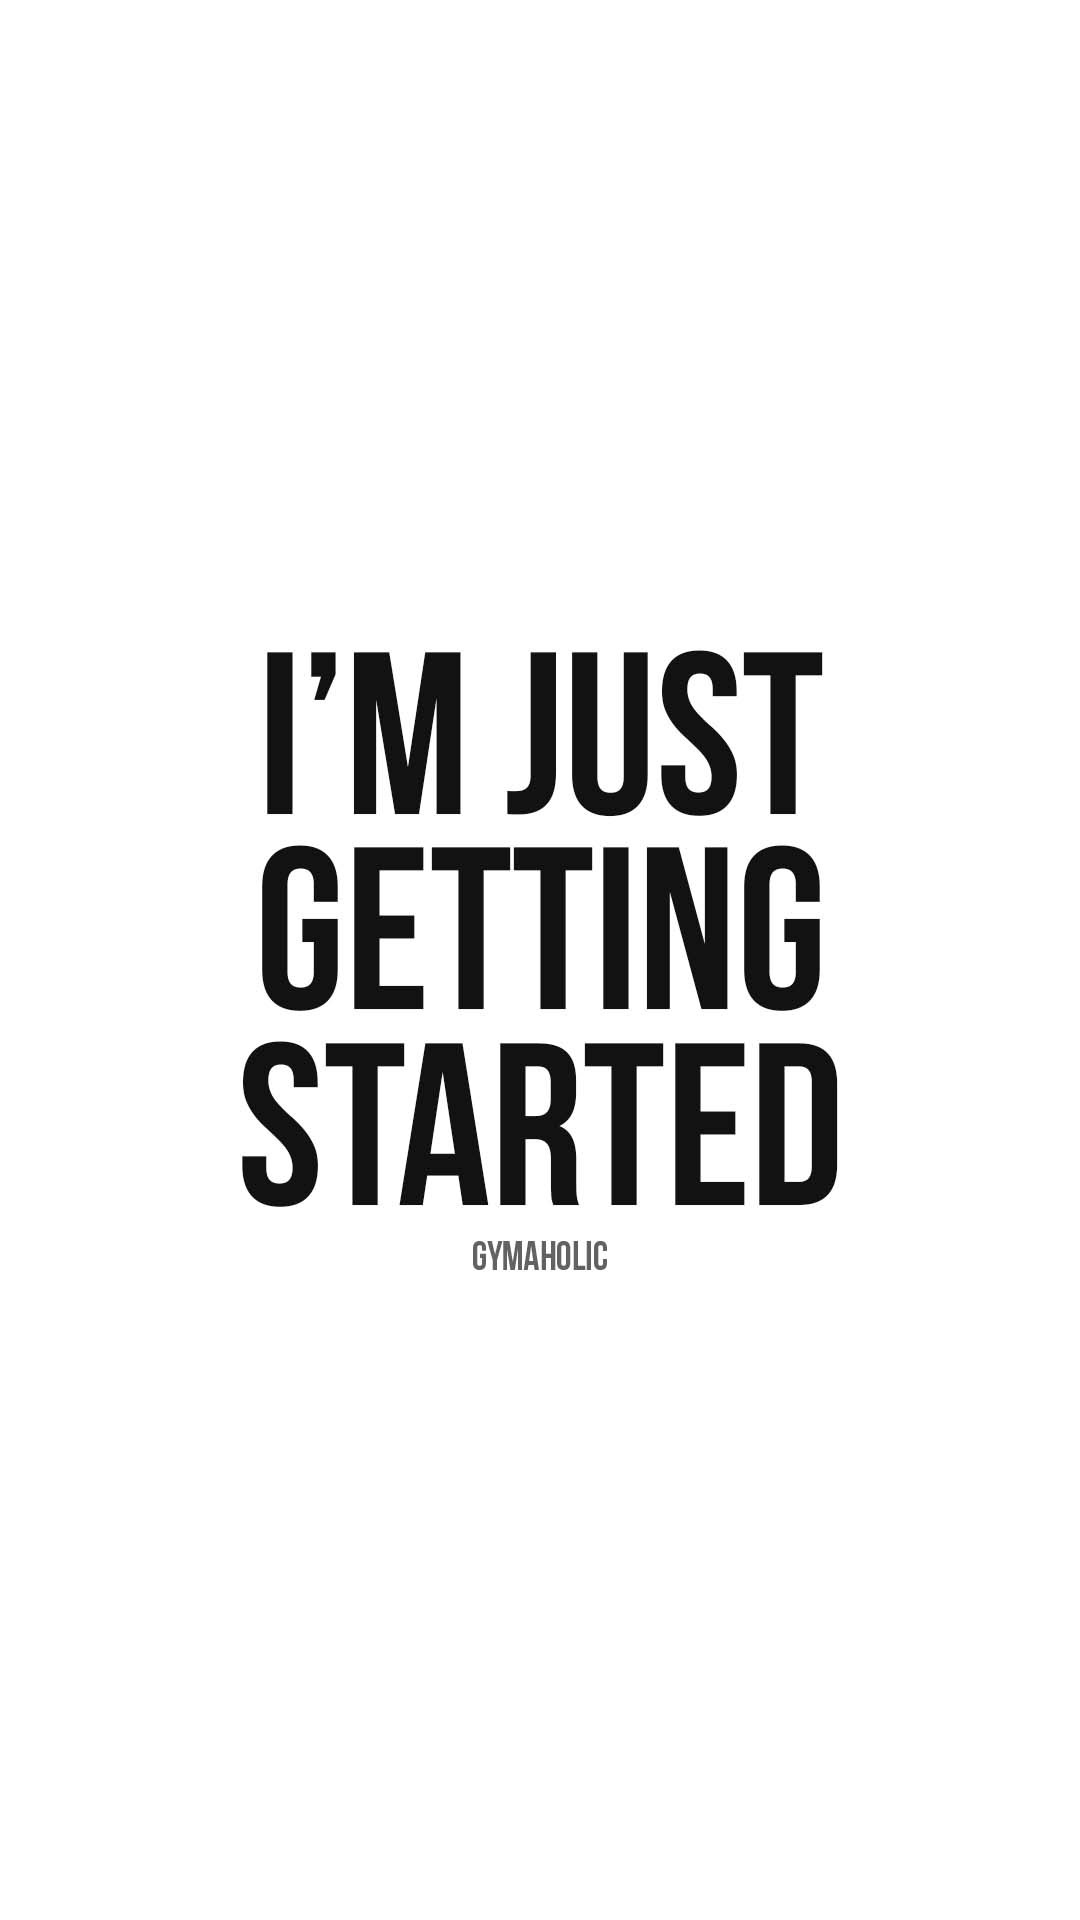 I’m just getting started